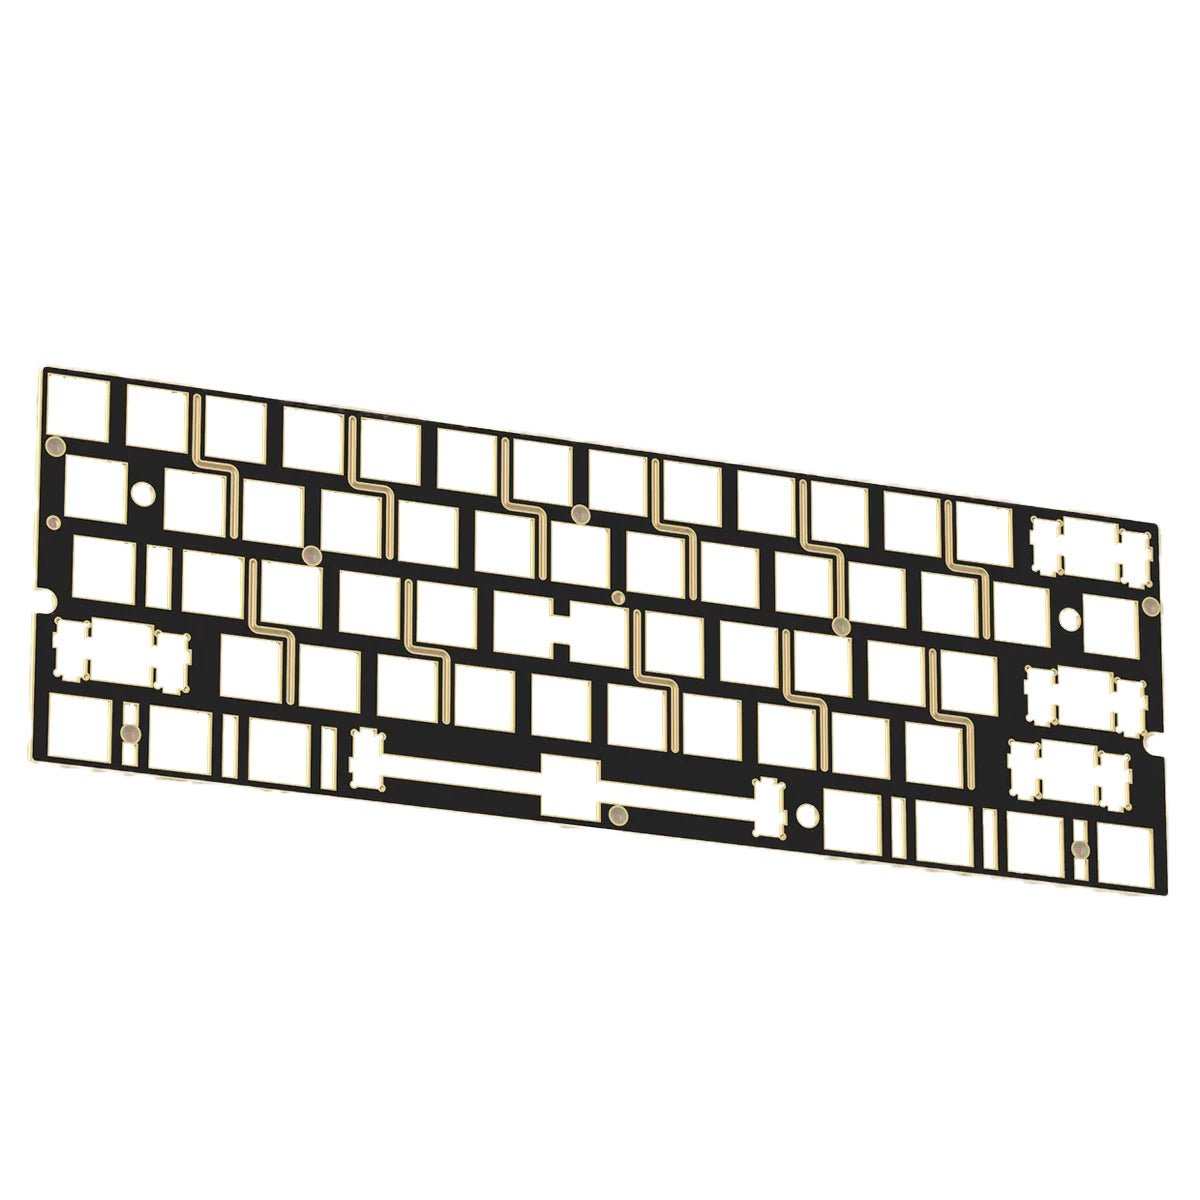 KBDfans Wooting60 HE Compatible Plates - Divinikey